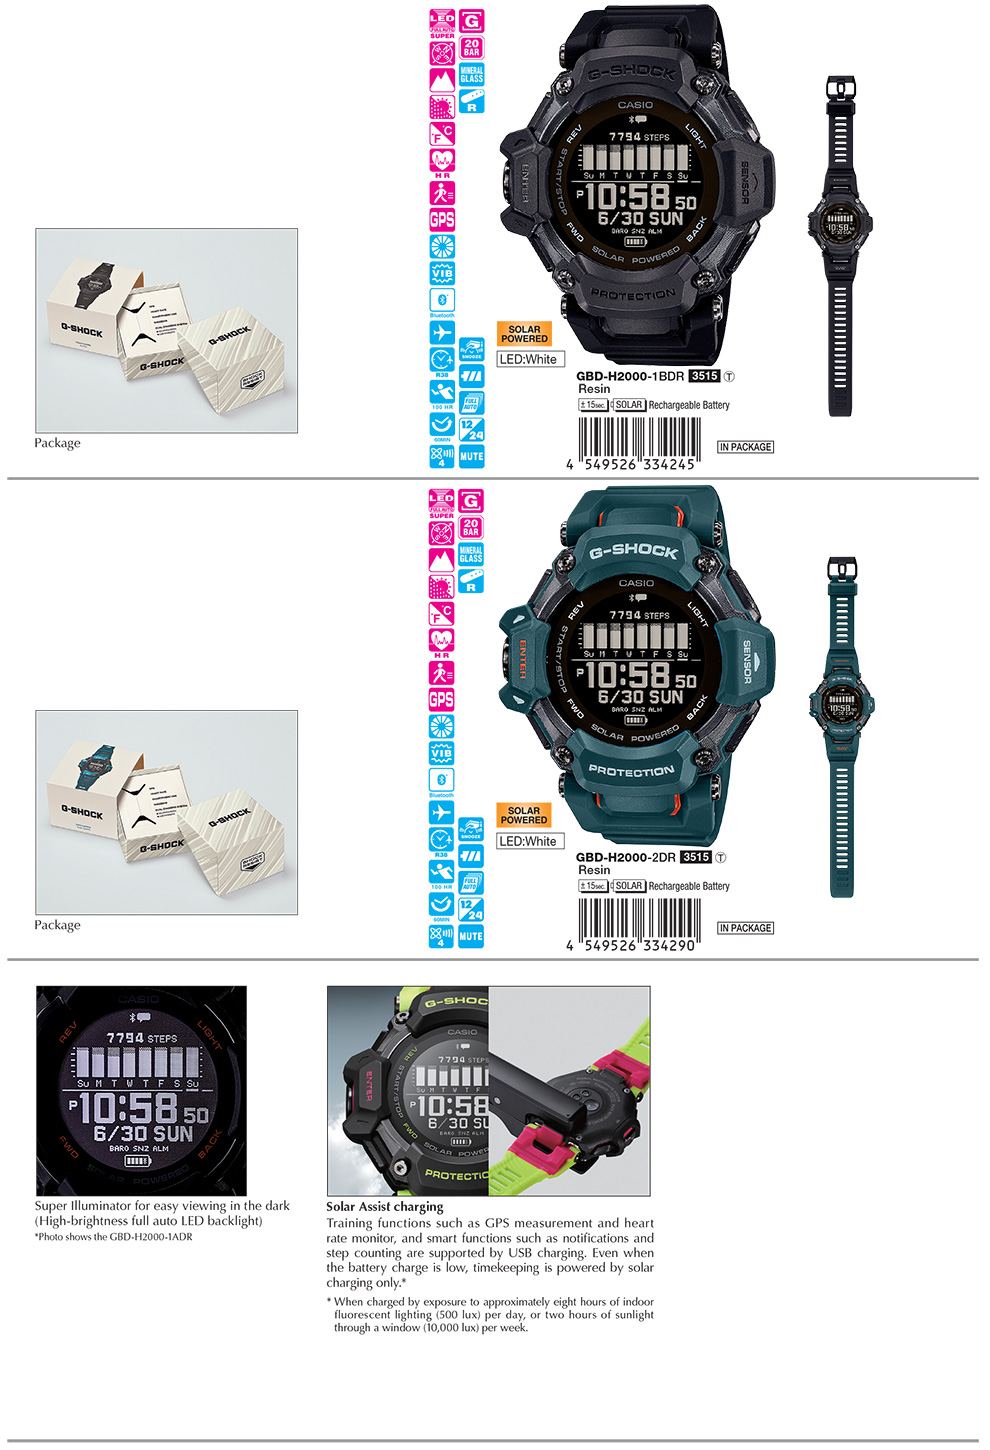 G-SHOCK, G-SQUAD, multi-sport, watches, heart rate monitor, GPS, USB Charger, solar, Polar, App integration, GBD-H2000-1B, GBD-H2000-2